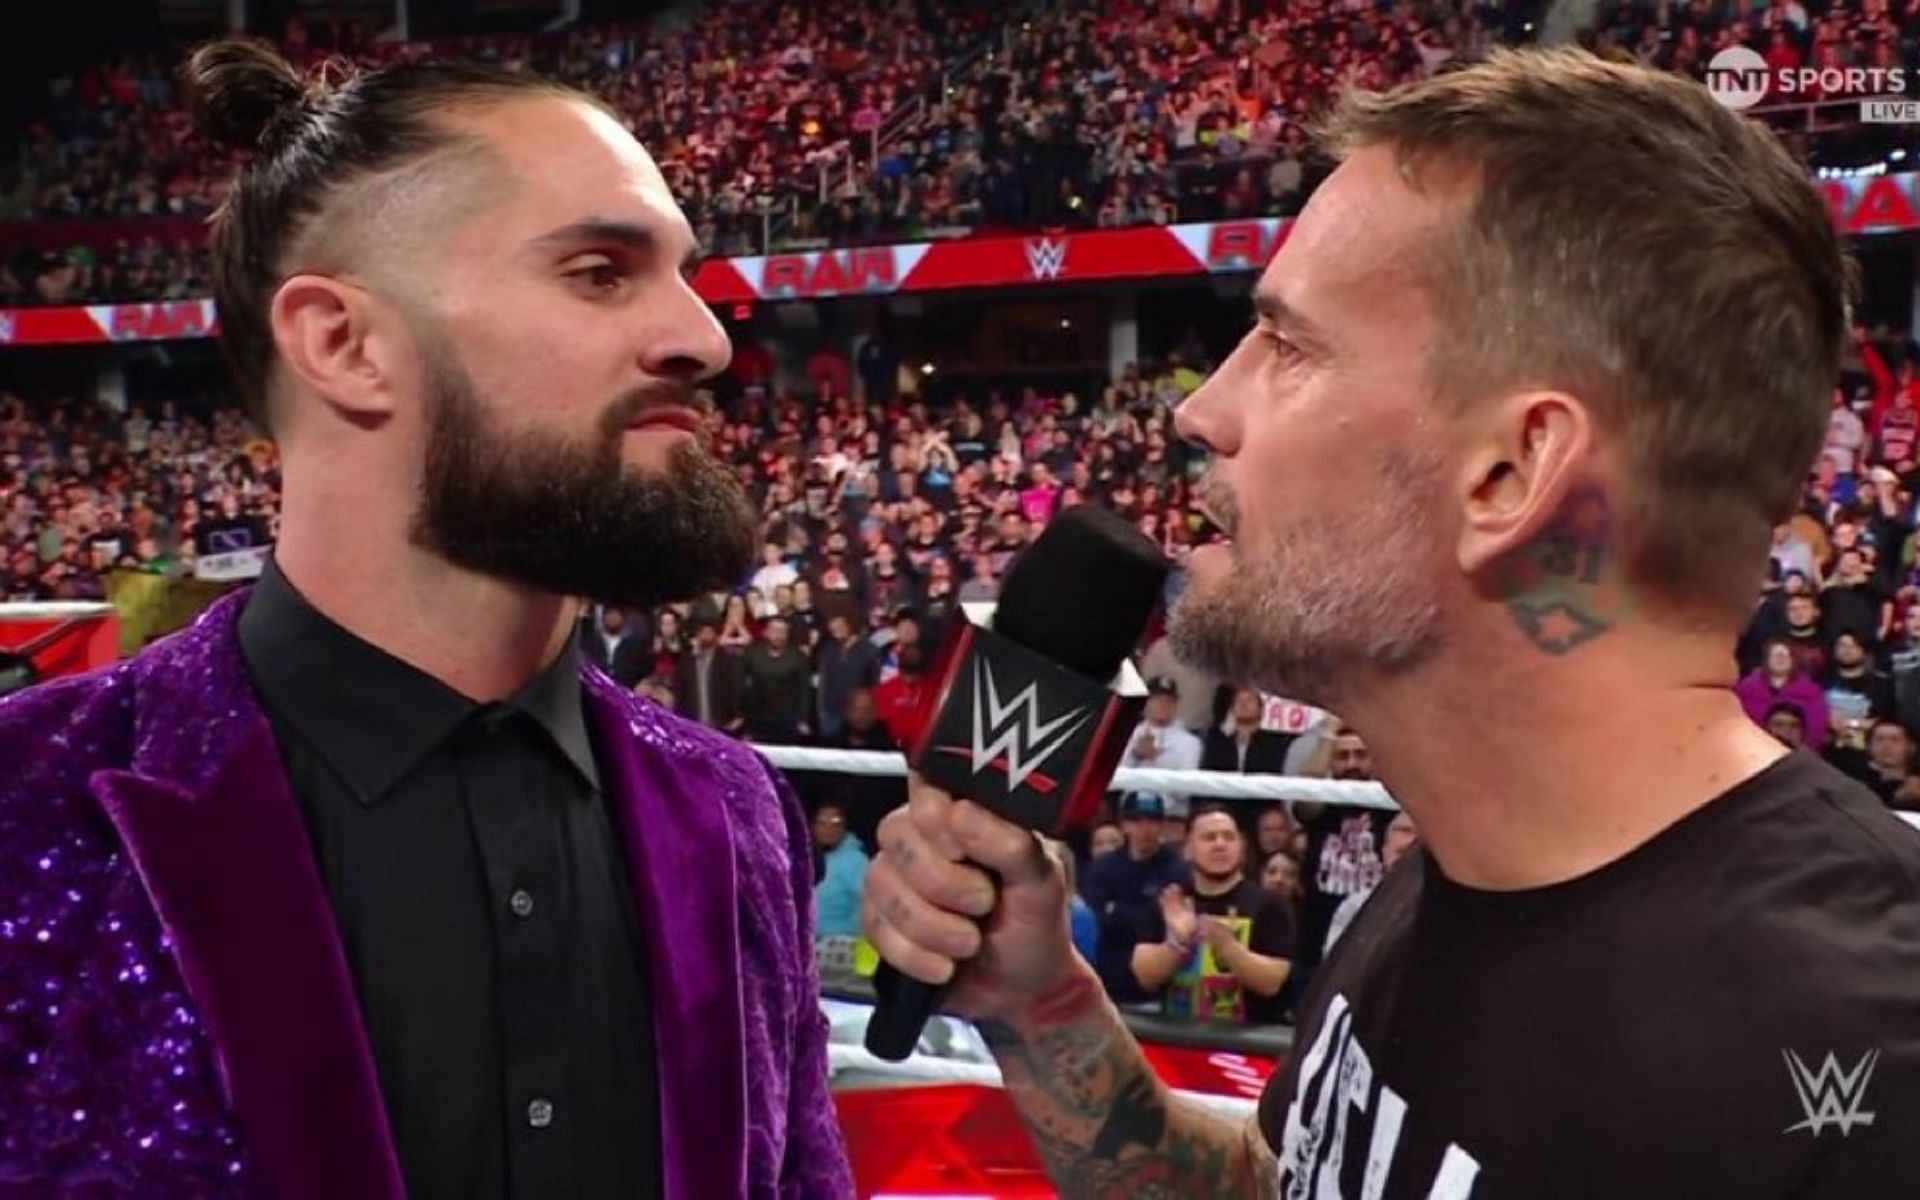 CM Punk makes a ground-breaking announcement after being ripped apart ...